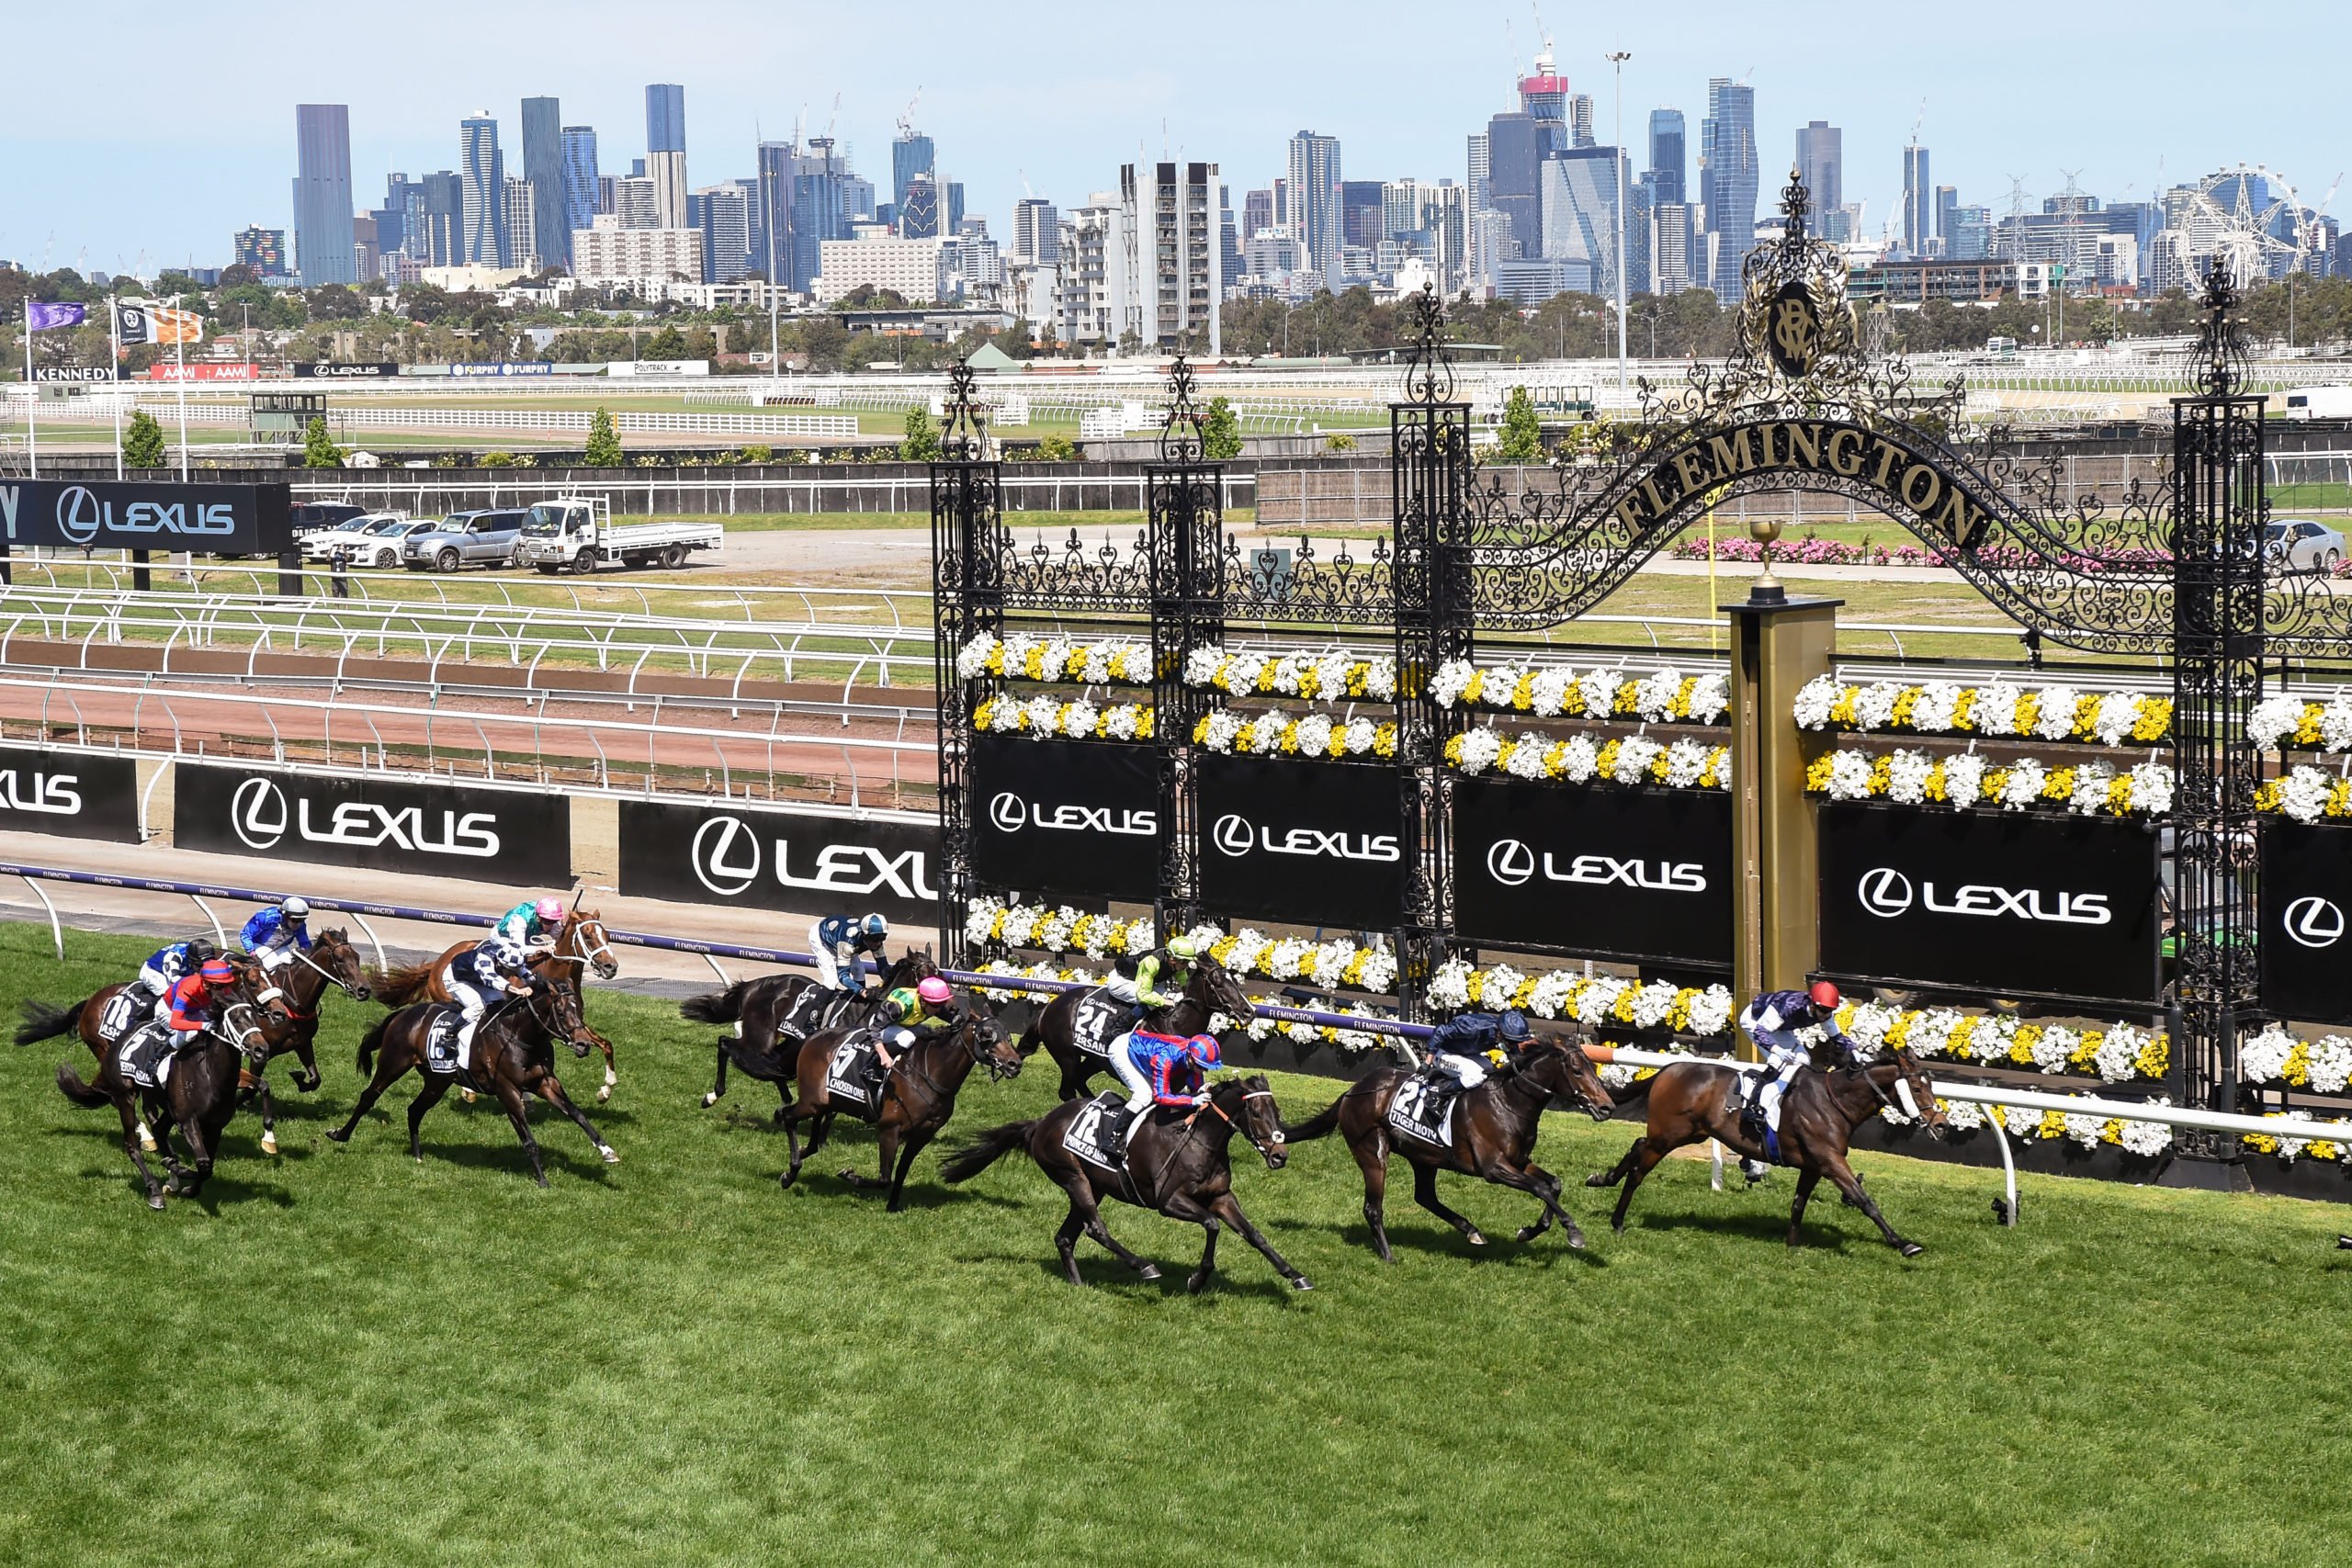 Bookies see record turnover on the Melbourne Cup Sports News Australia